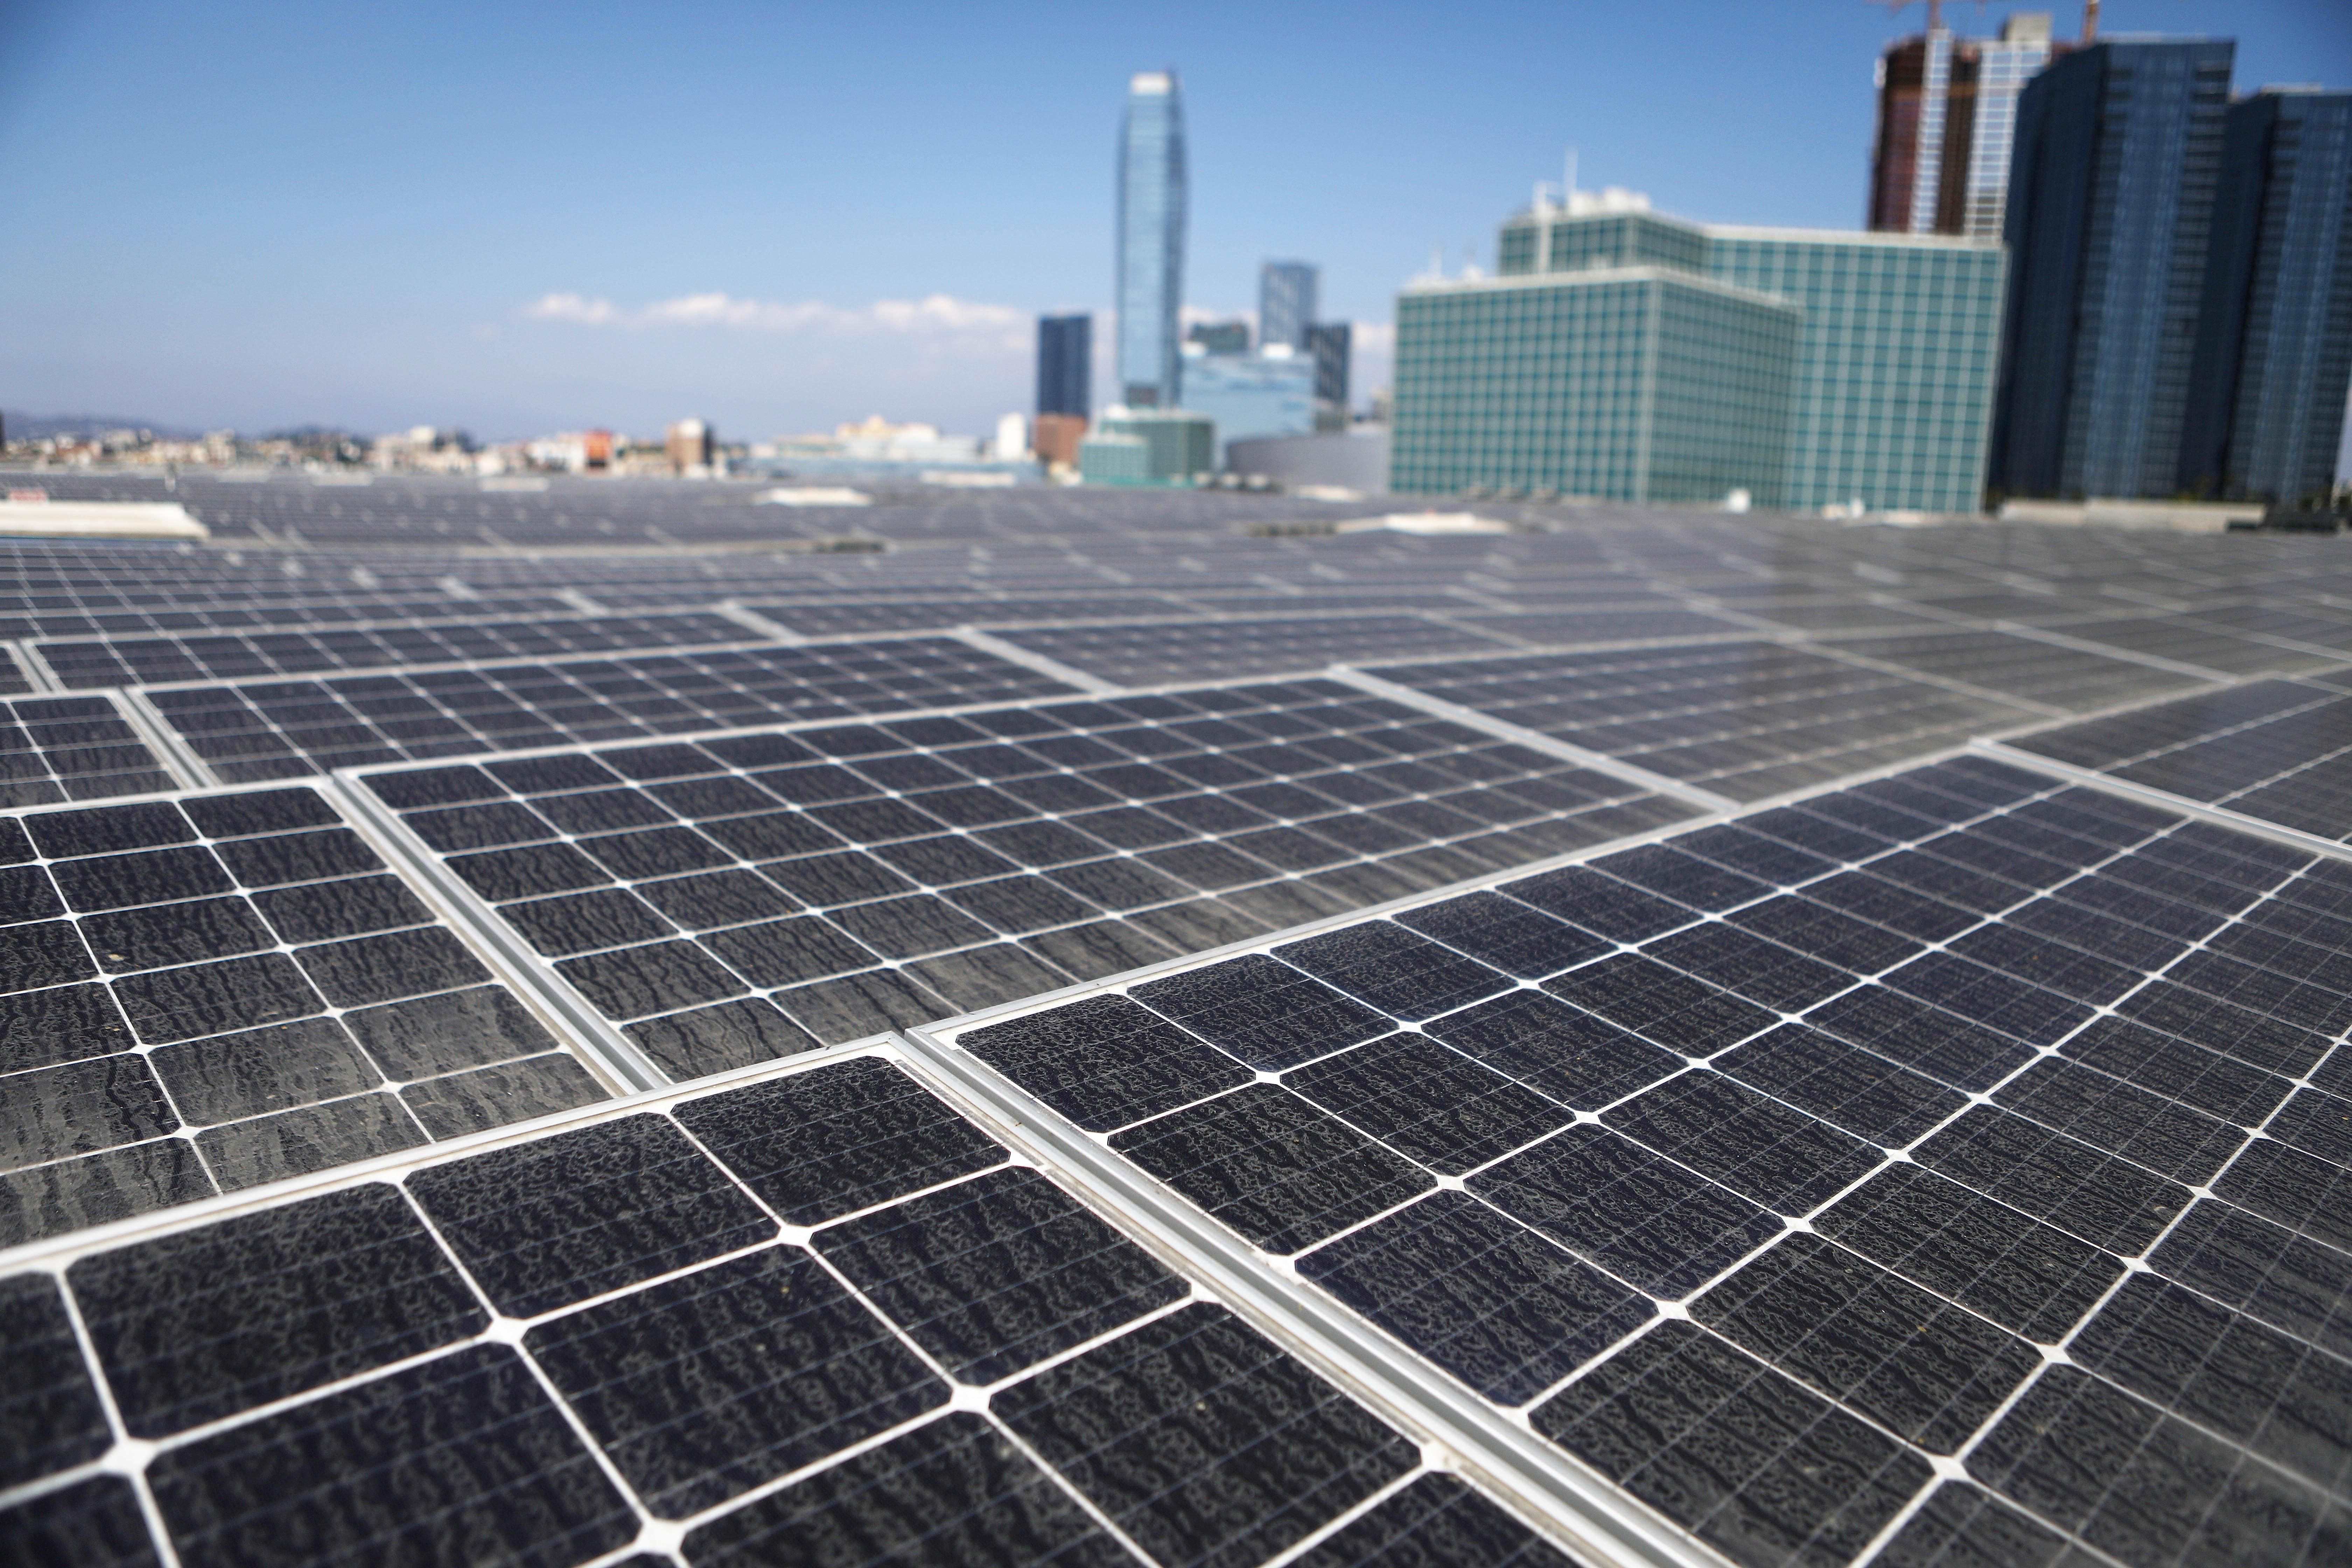 Solar panels are mounted atop the roof of the Los Angeles Convention Center